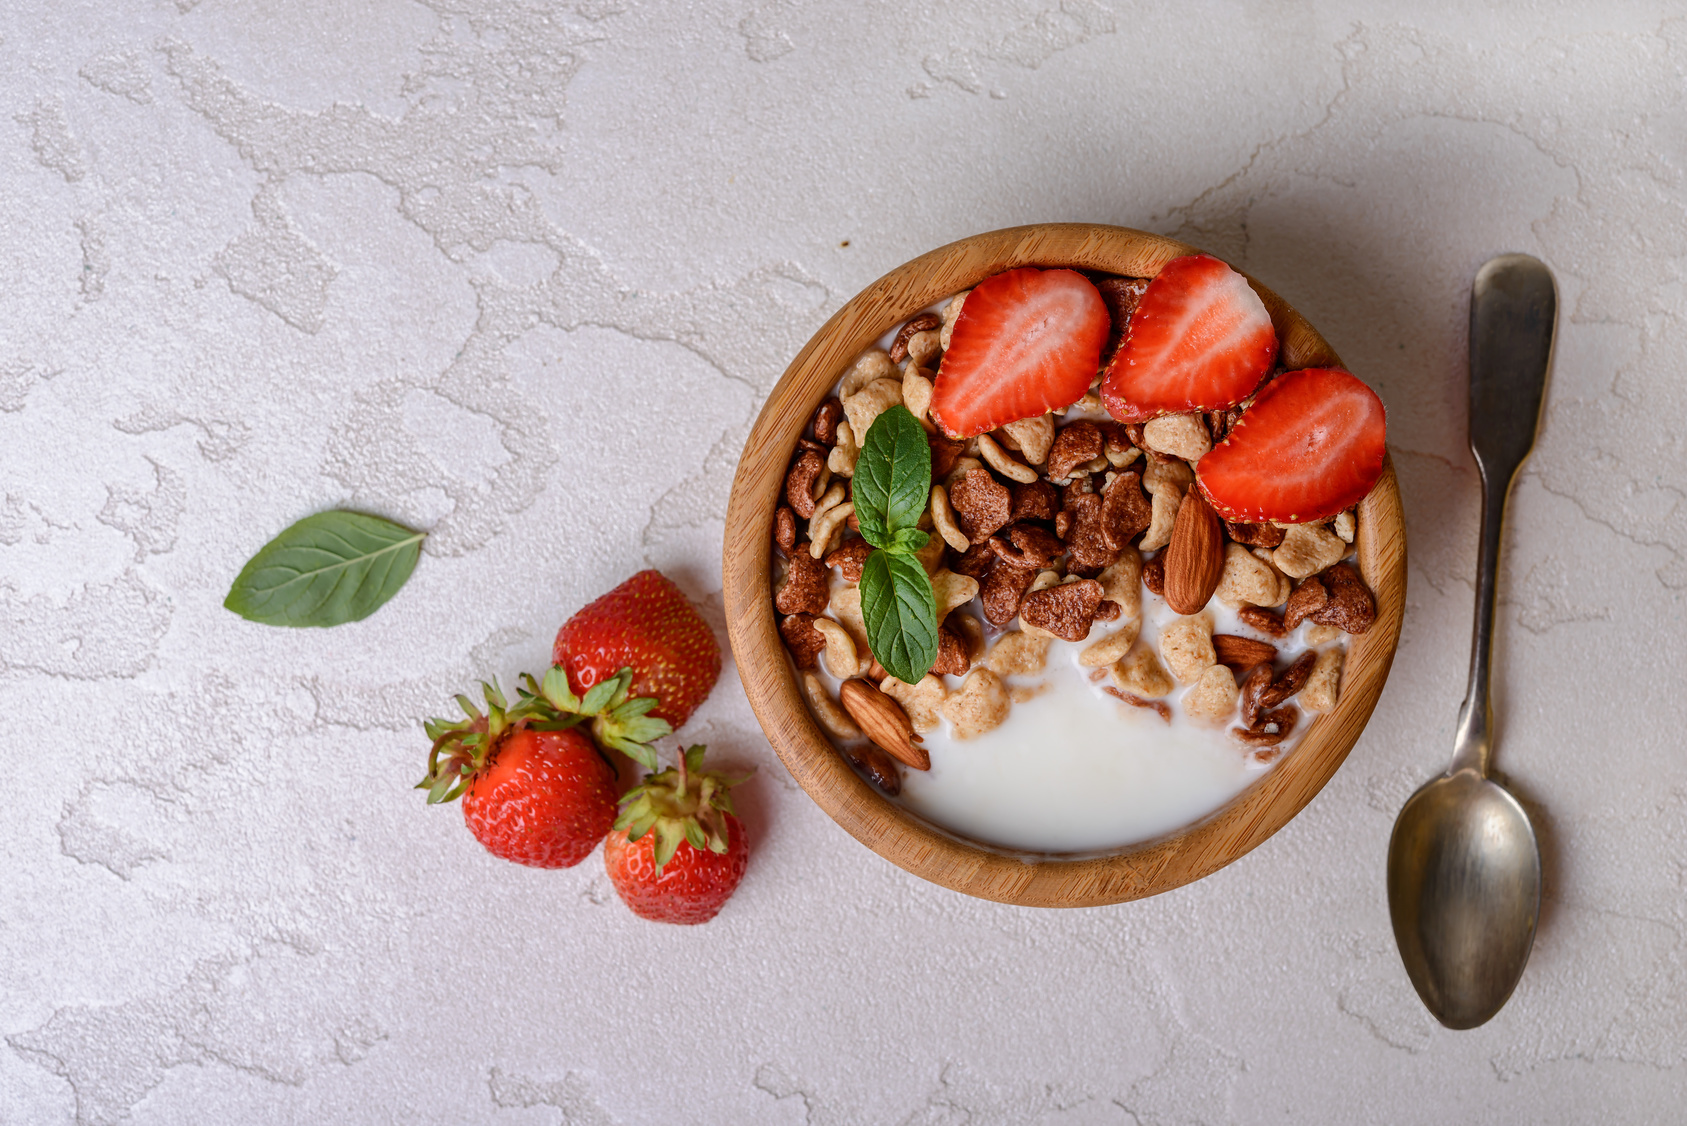 Healthy breakfast  with muesli,  berries and nuts  in bowl on grey background. Healthy food concept. Flat lay.